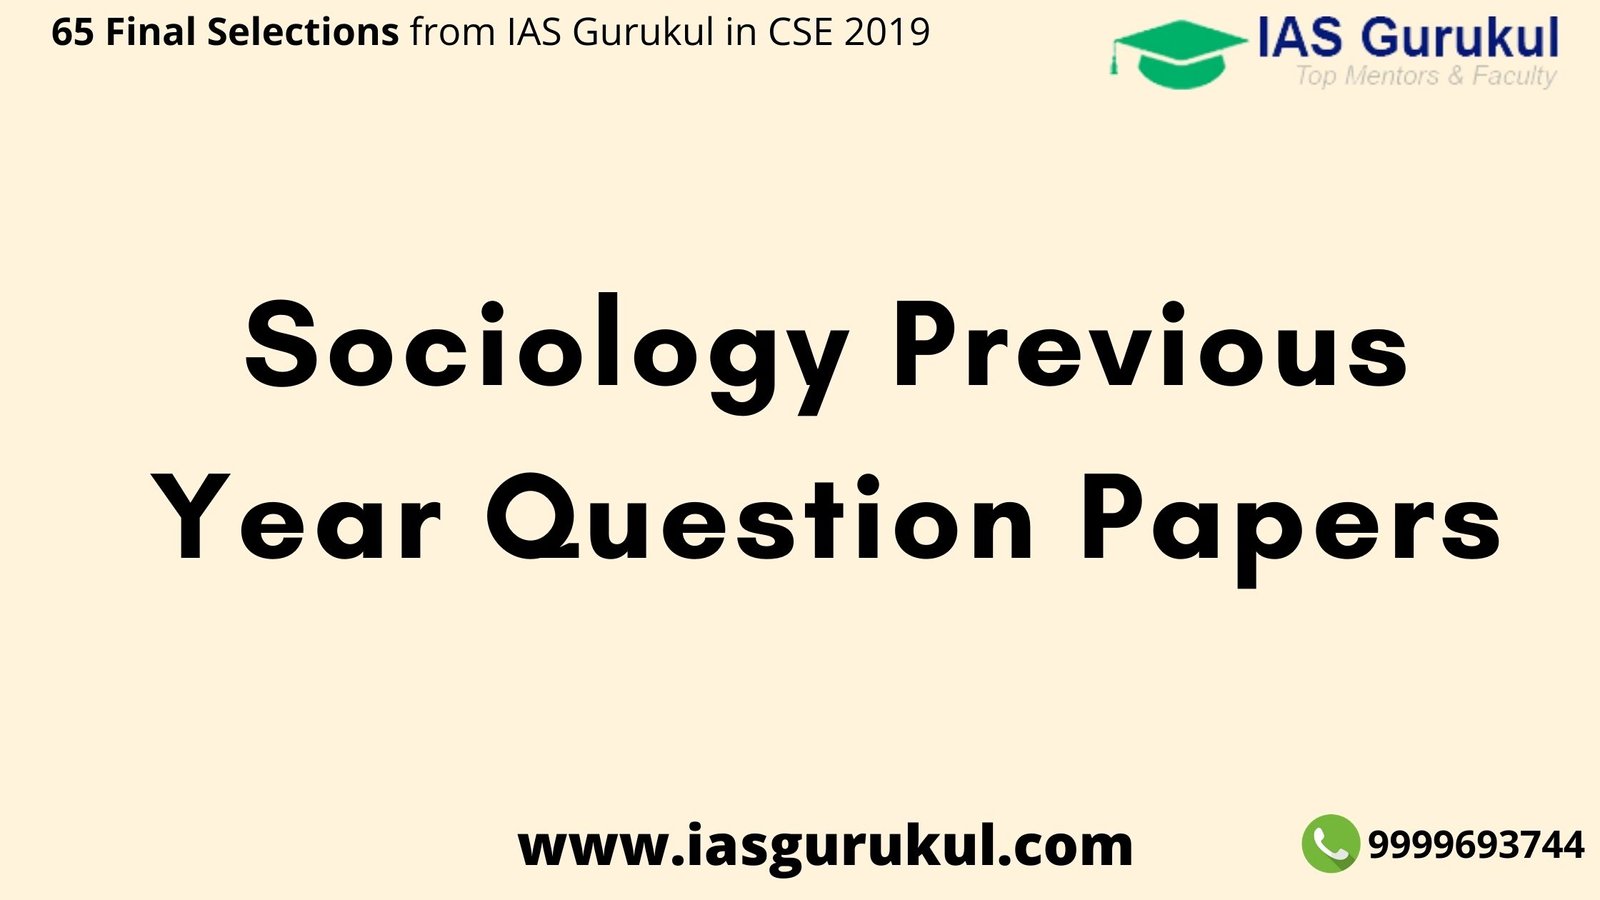 Sociology Previous Year Question Papers